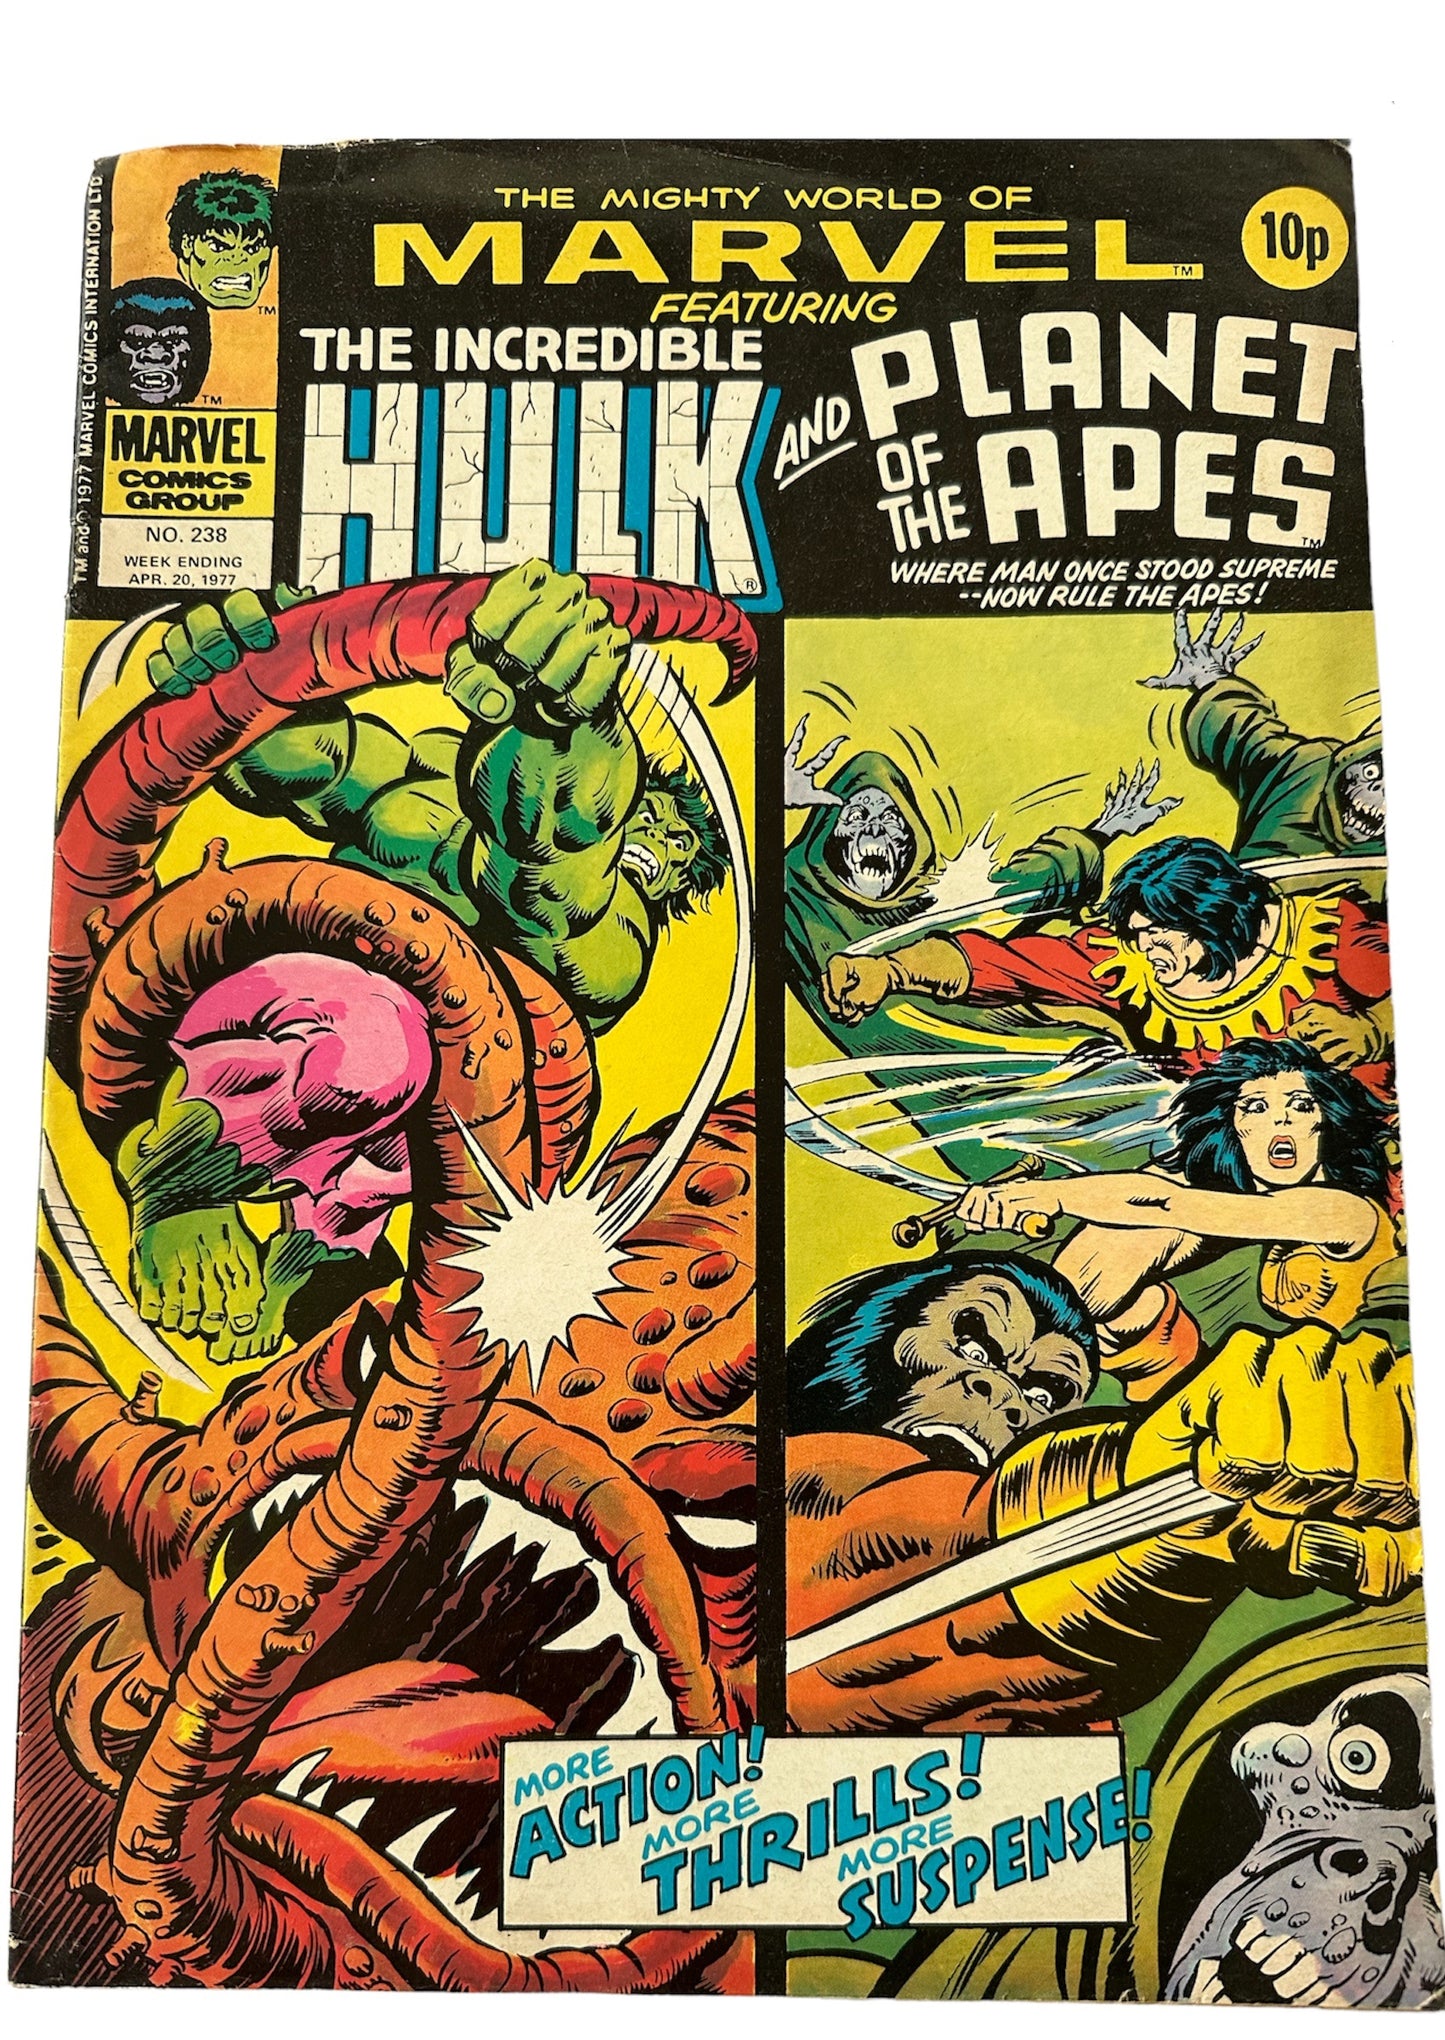 Vintage 1977 The Mighty World Of Marvel Comic Issue Number 238 - Featuring The Incredible Hulk And Planet Of The Apes - Fantastic Condition Vintage Comic